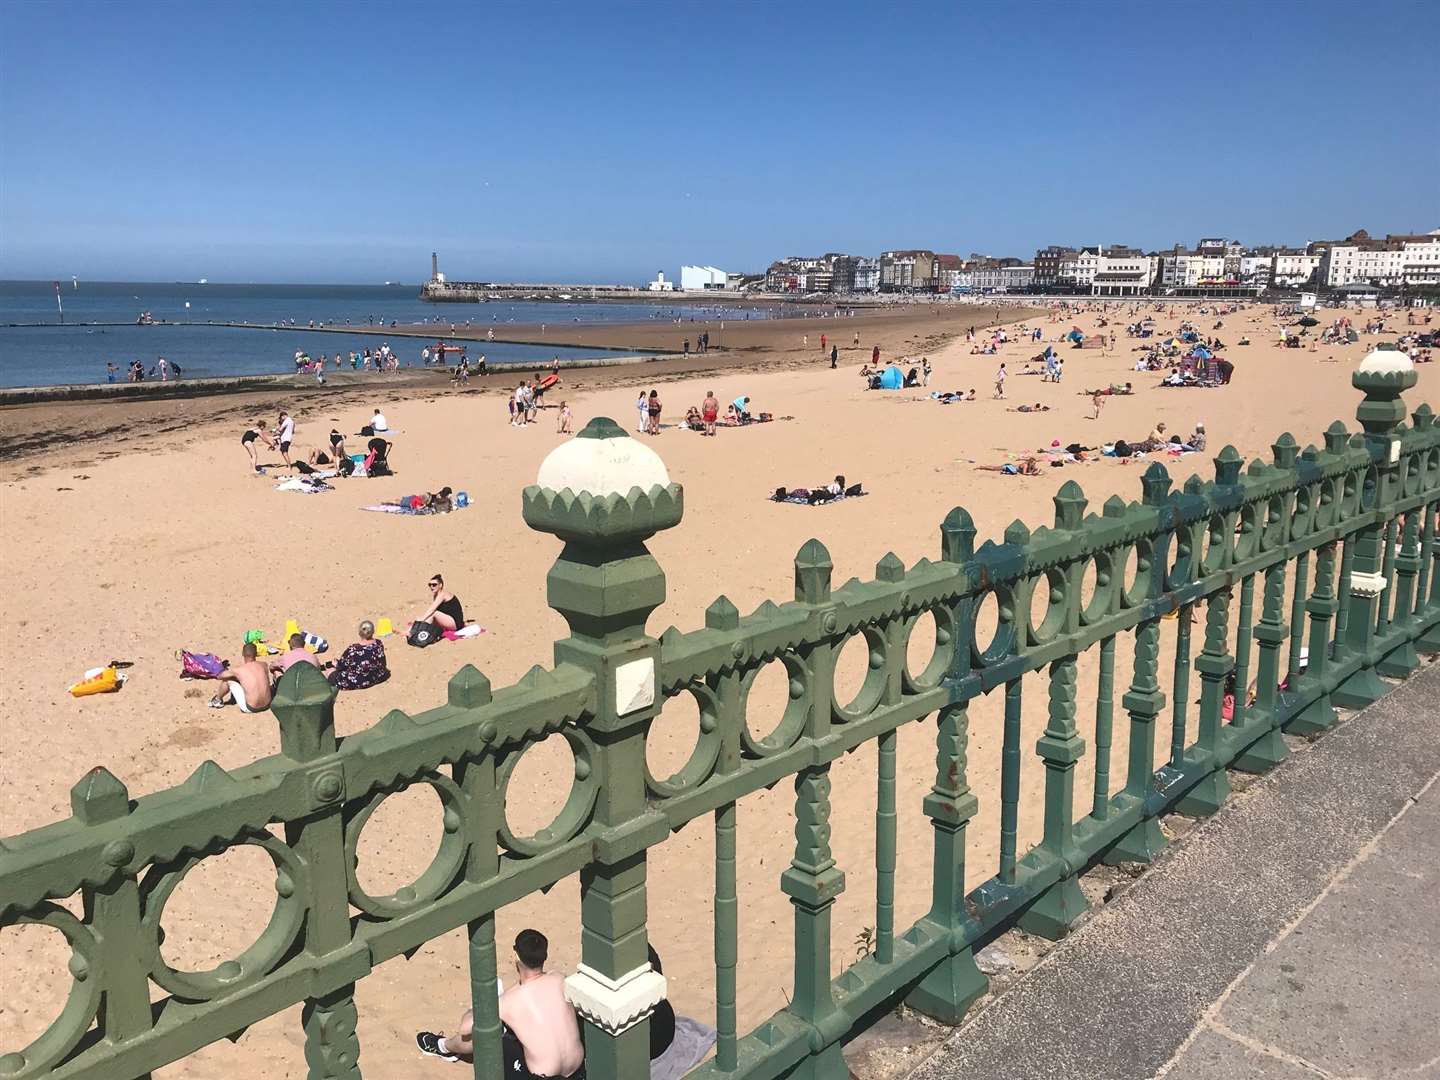 Margate is now increasingly reliant once more on its tourism industry